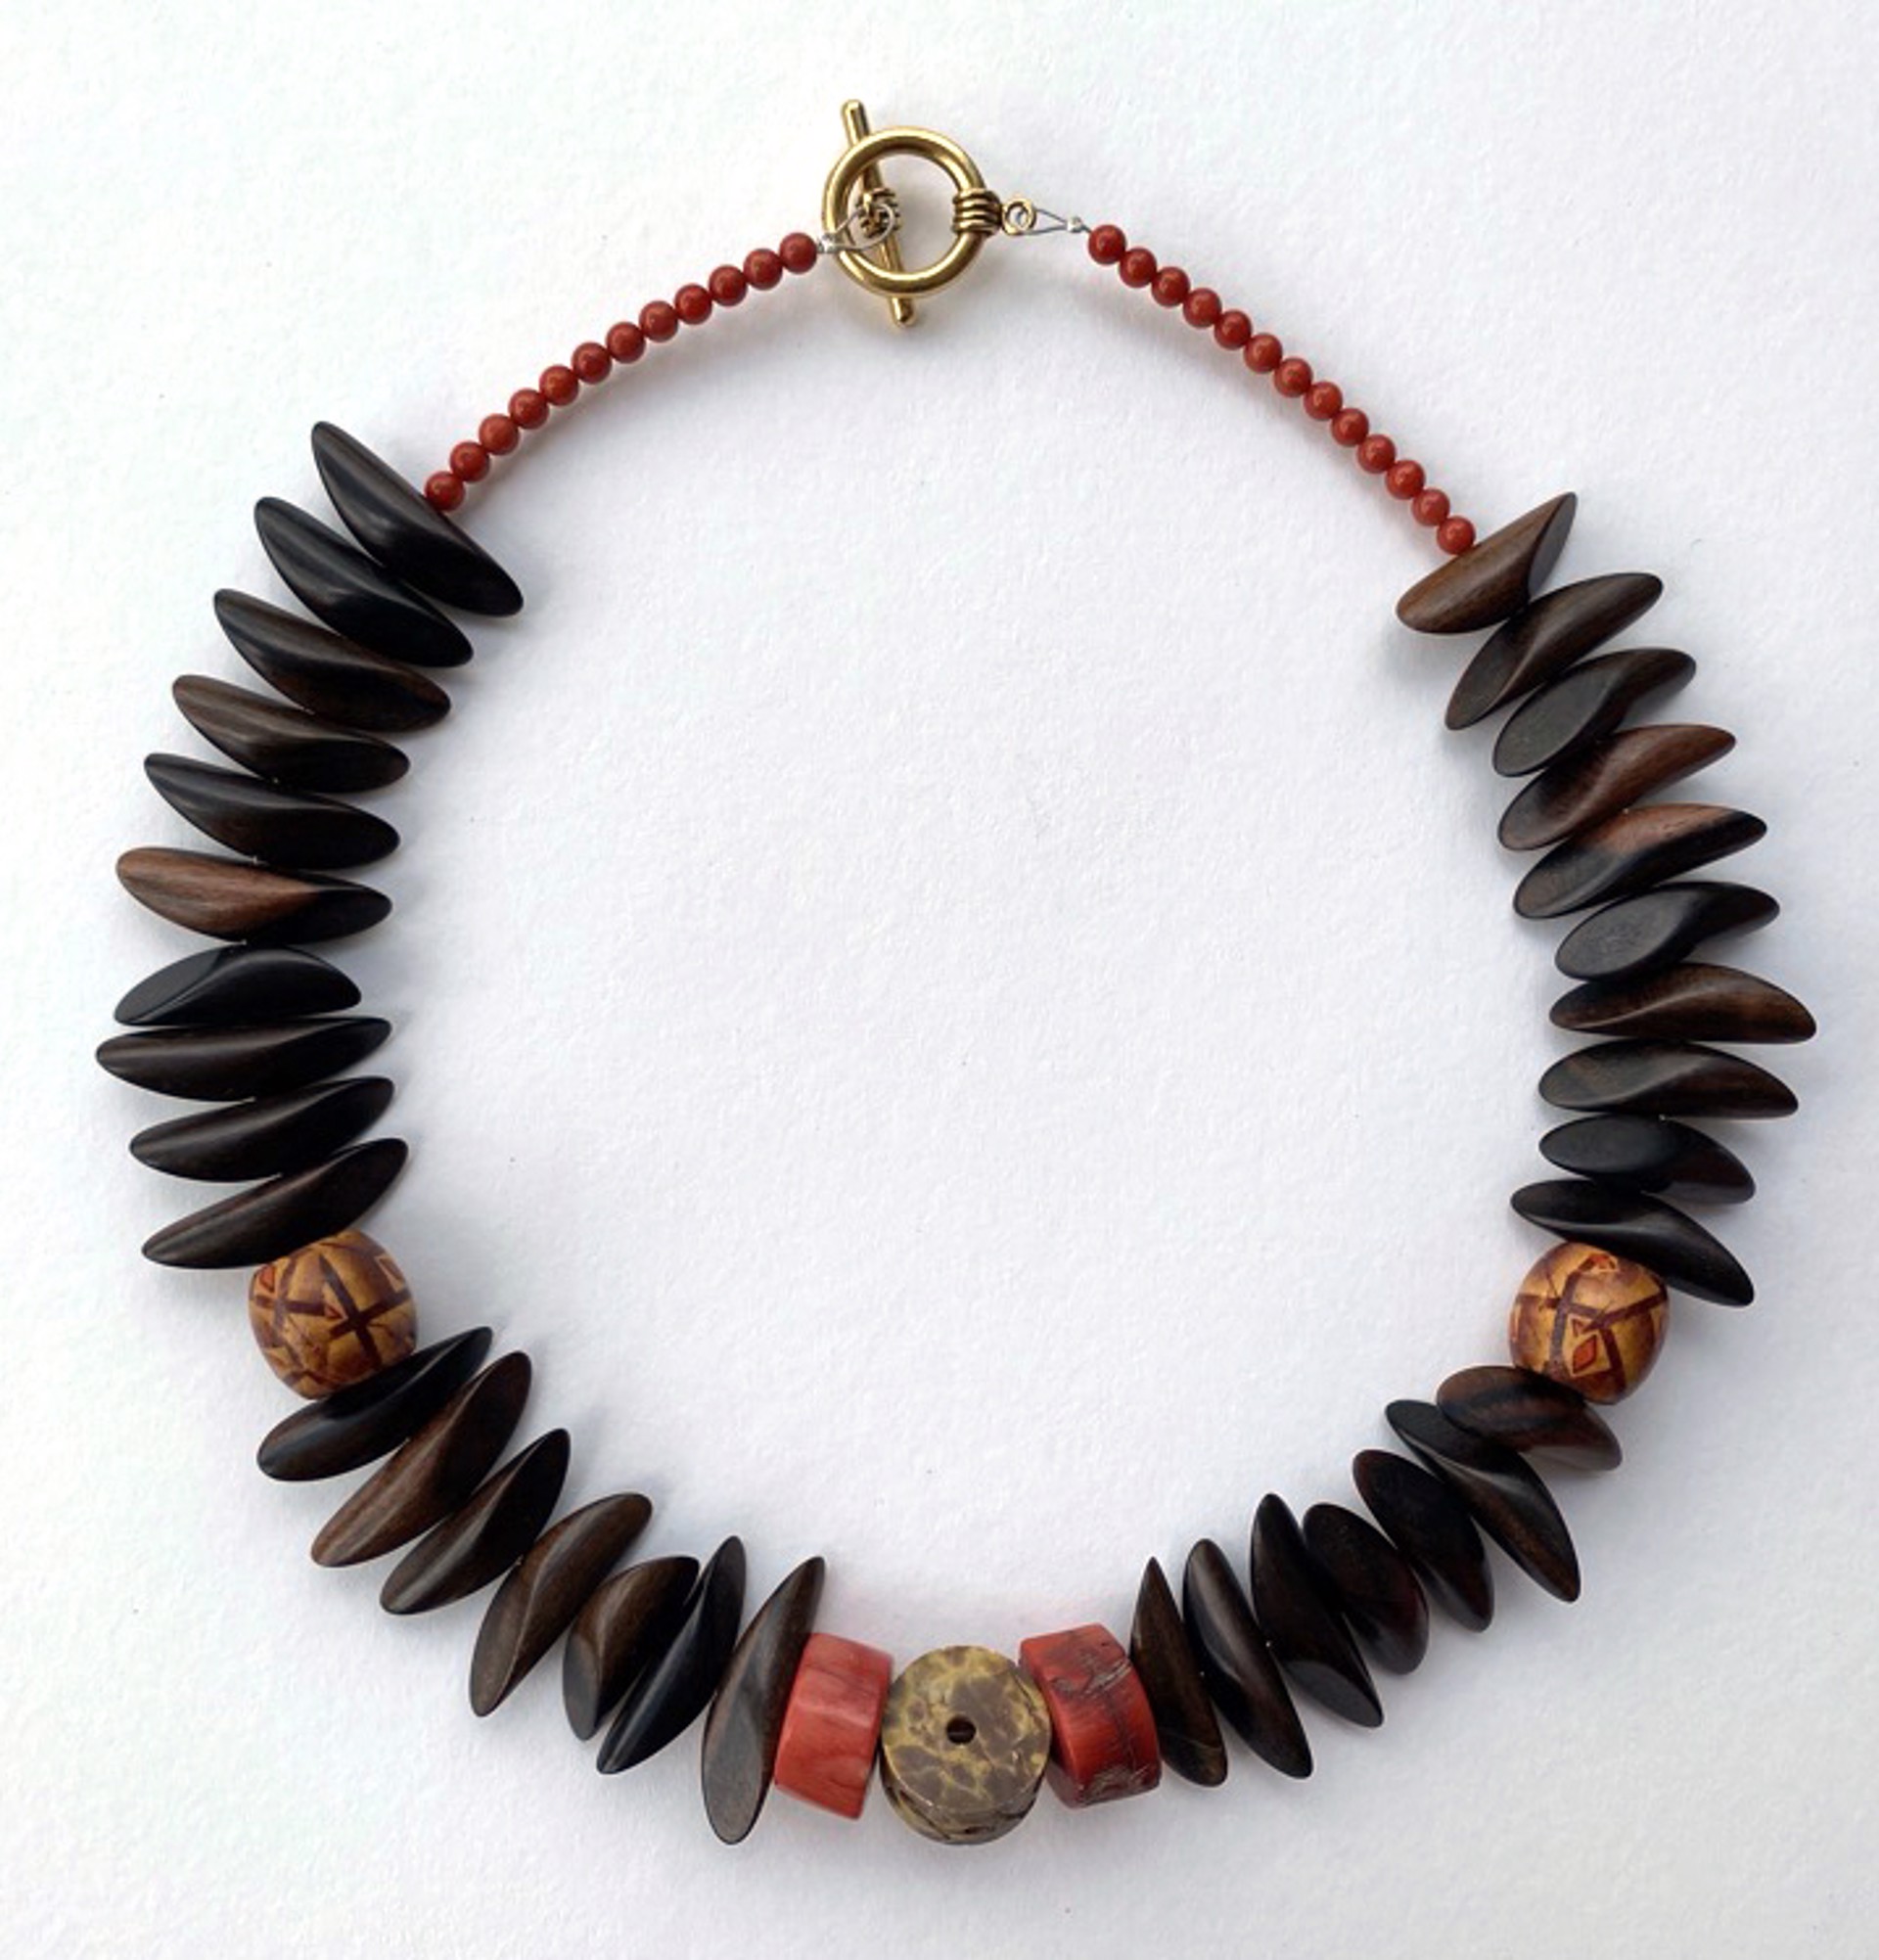 Ebony Wood with Red Coral by Laetitia Atlantis